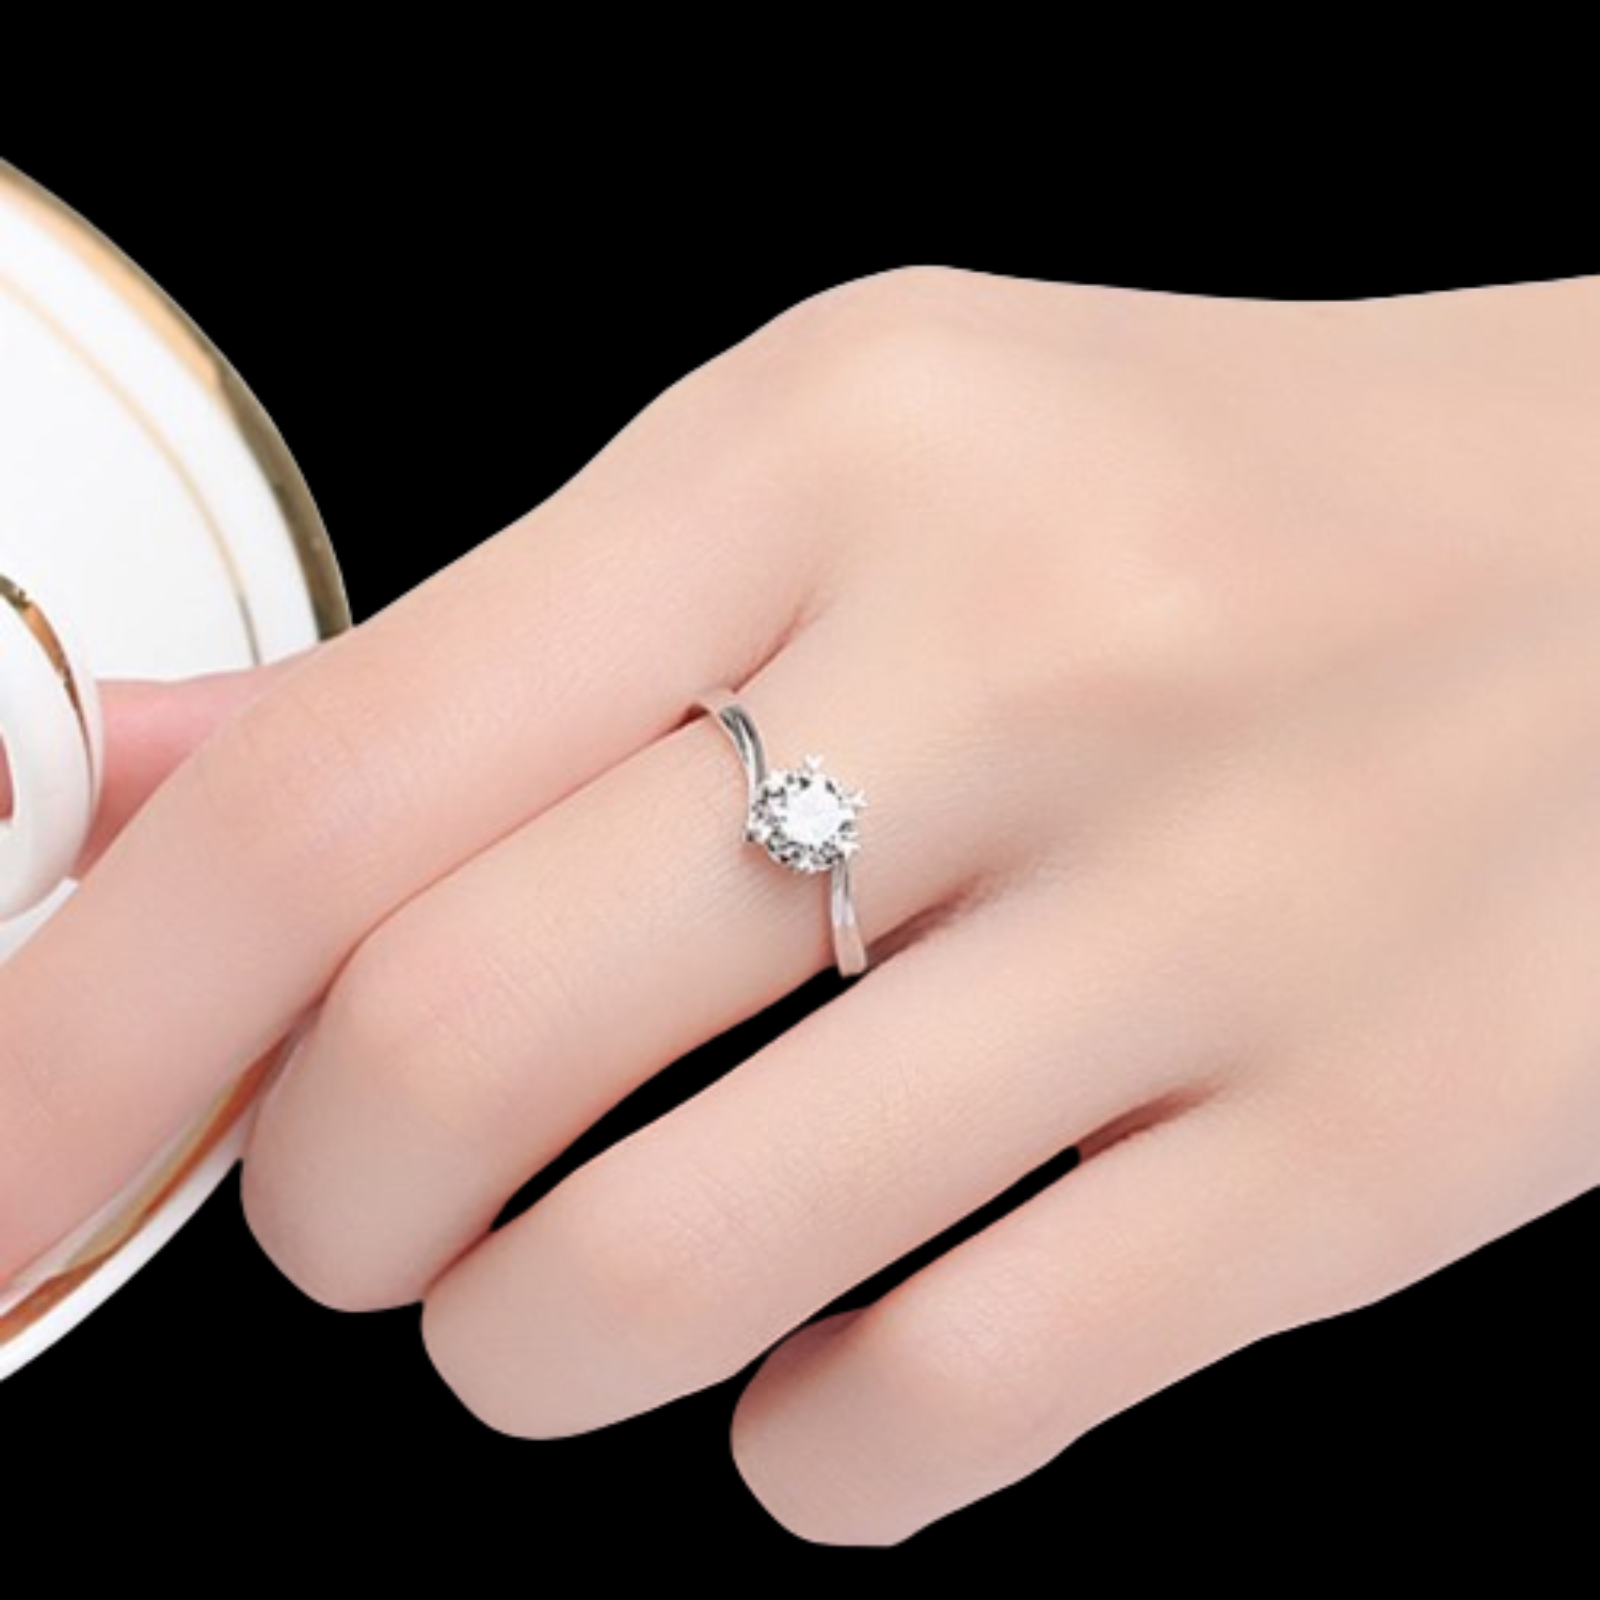 Capture her heart forever with the Timeless Snowflake: A Diamond Proposal Ring She'll Adore LA ROSE BEAUTY